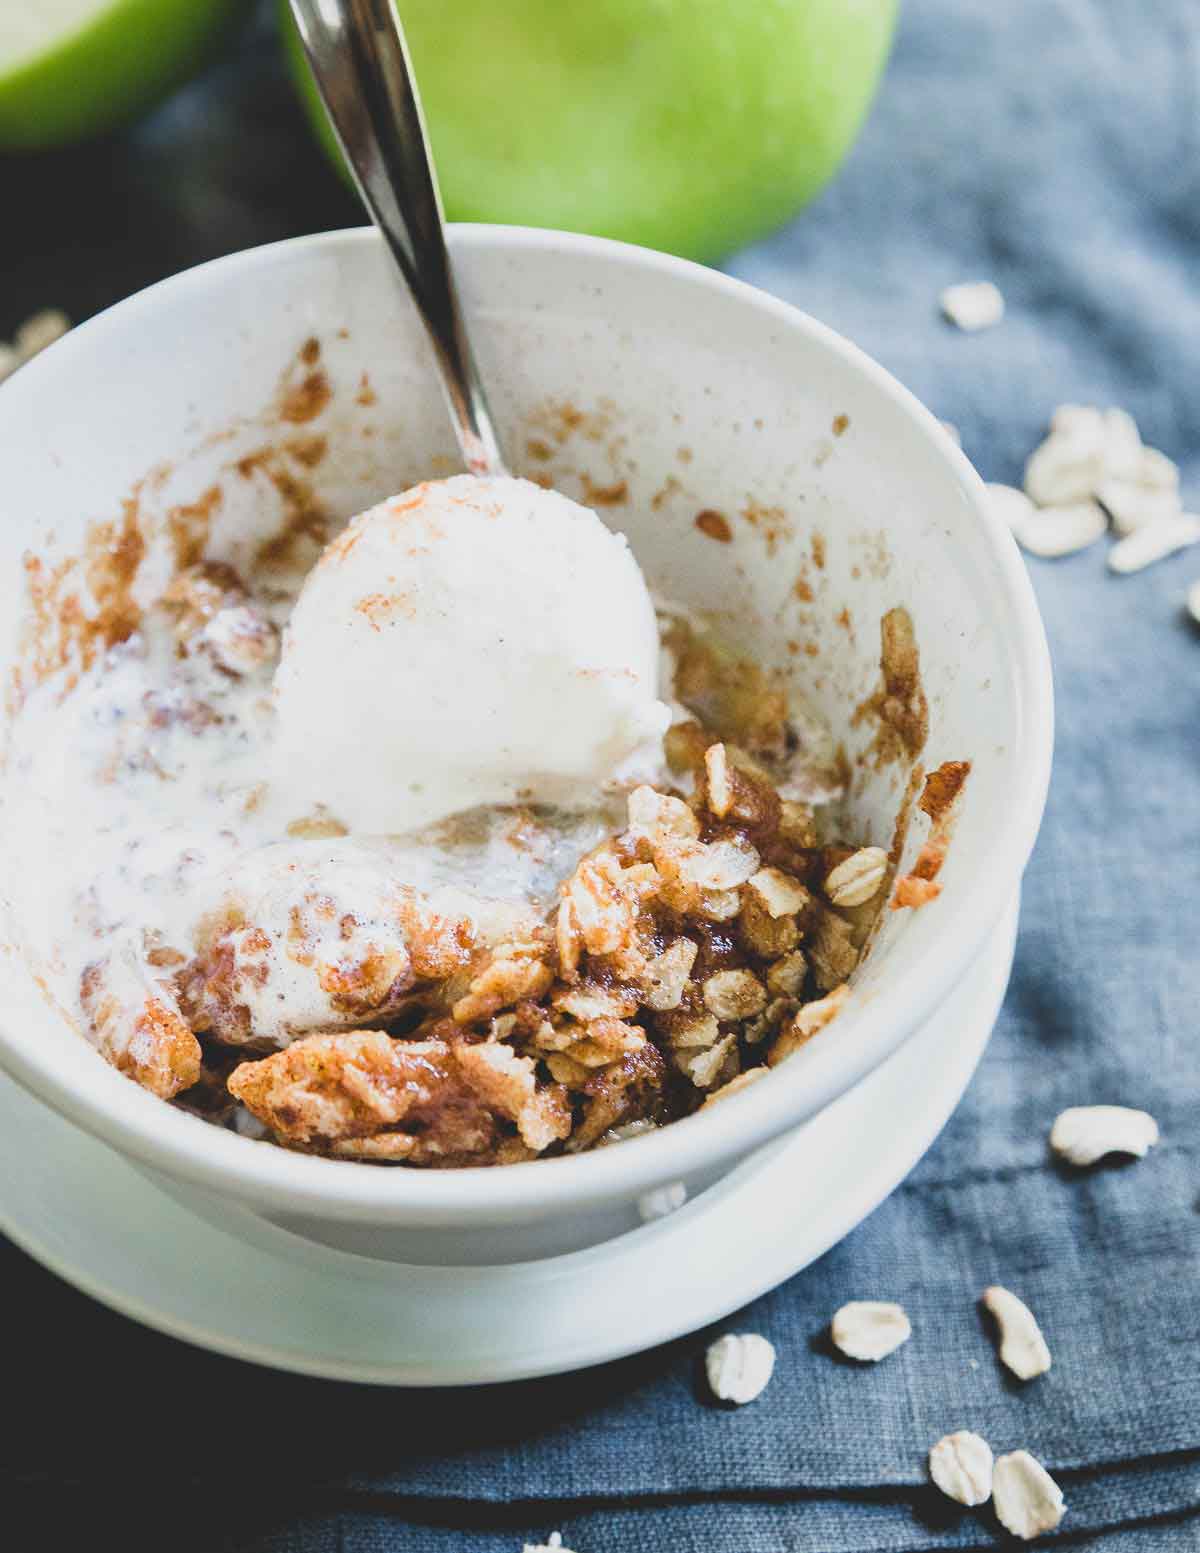 Top this single serve microwave apple crisp recipe with a scoop of vanilla ice cream and enjoy!